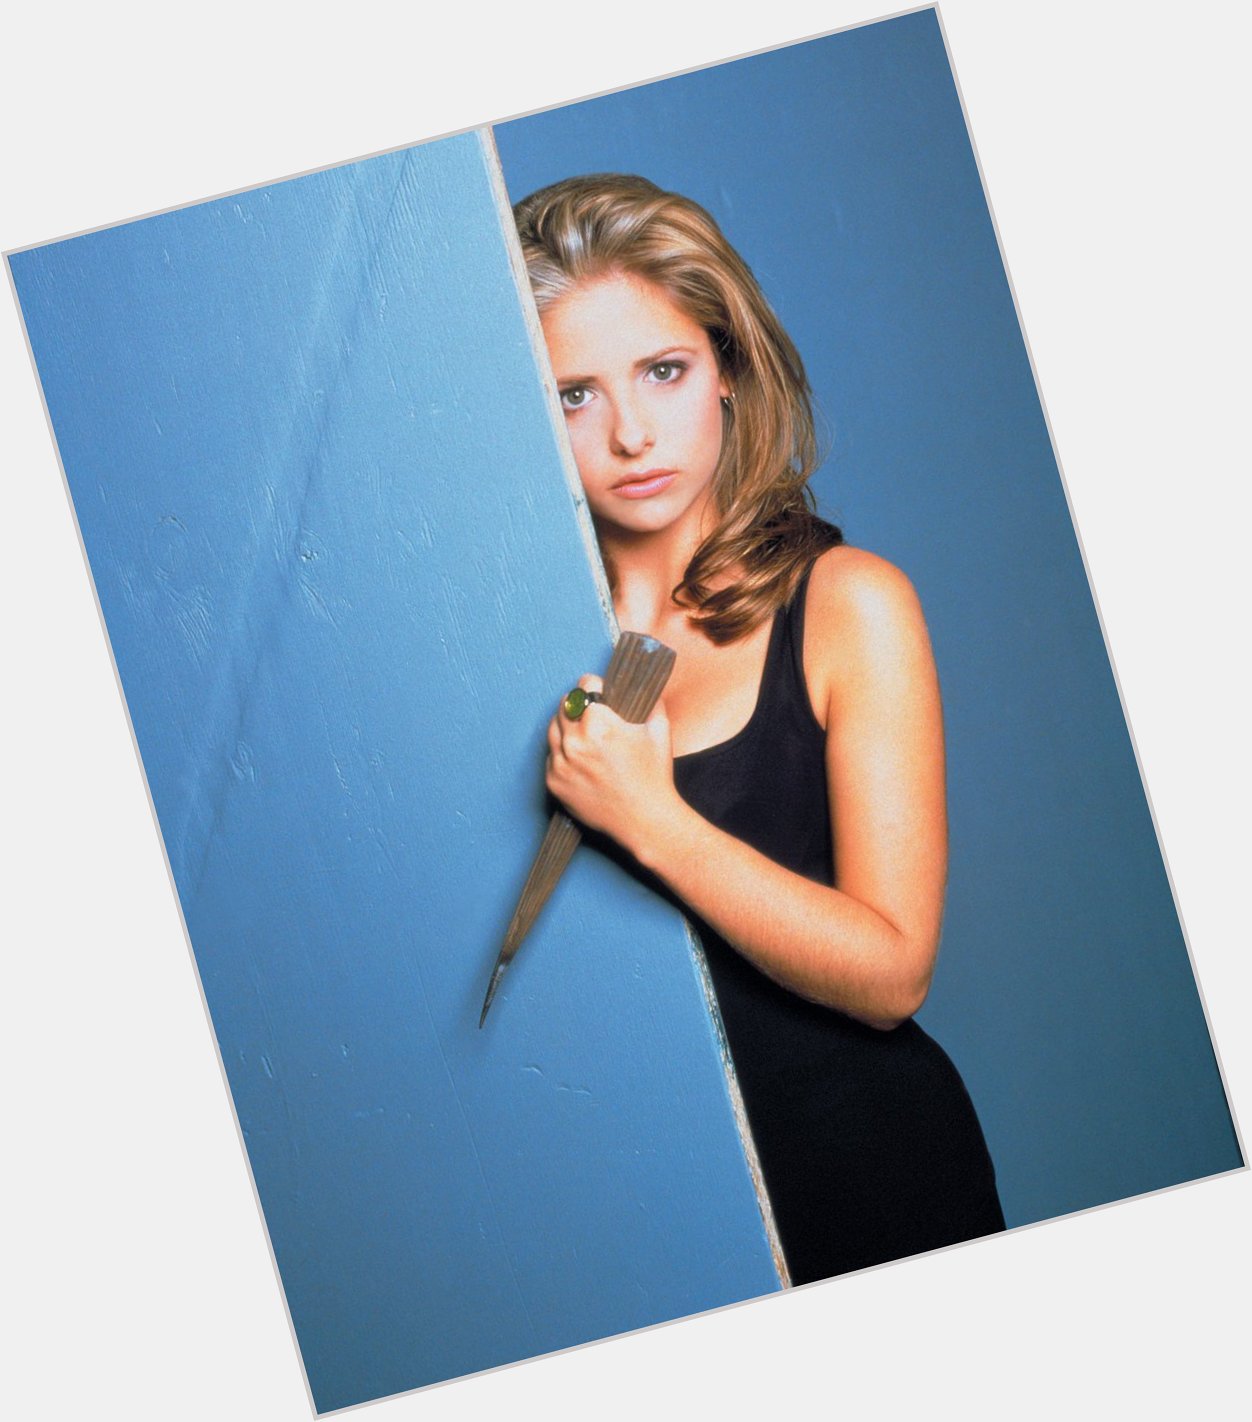 A very happy birthday to our fave vampire slayer! Sarah Michelle Gellar!! 